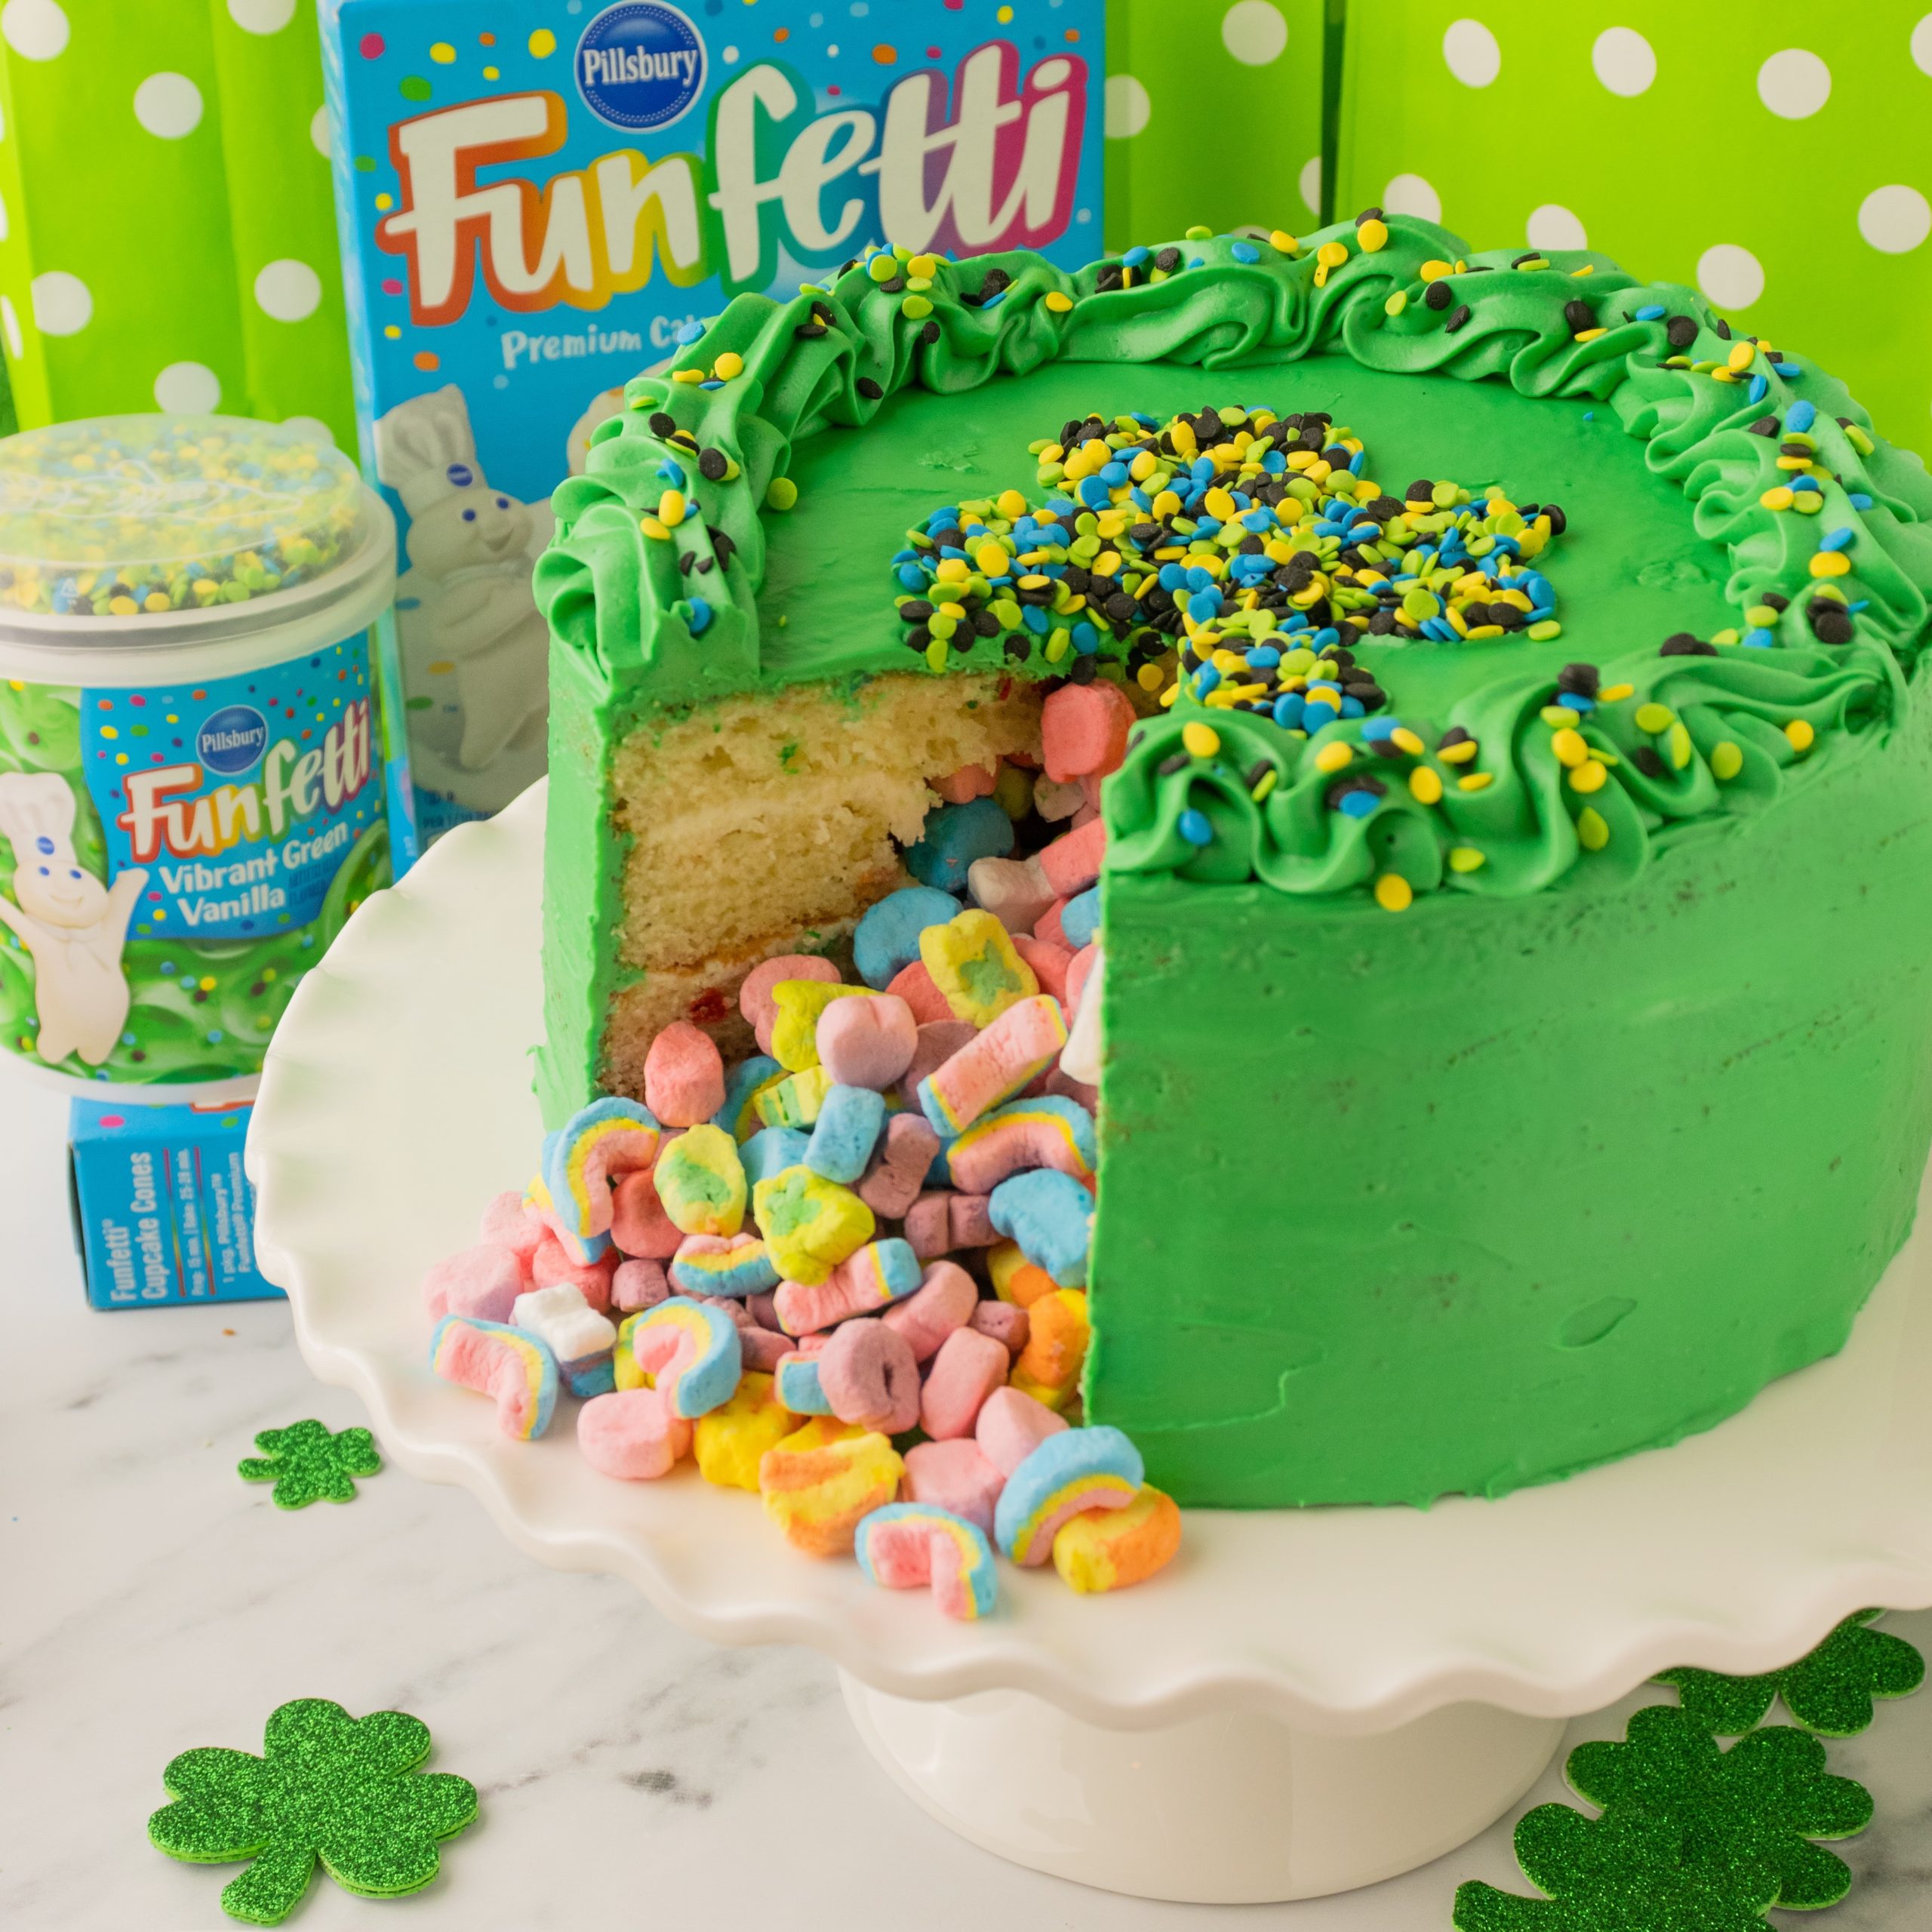 Funfetti® Surprise Cake for St. Patrick's Day